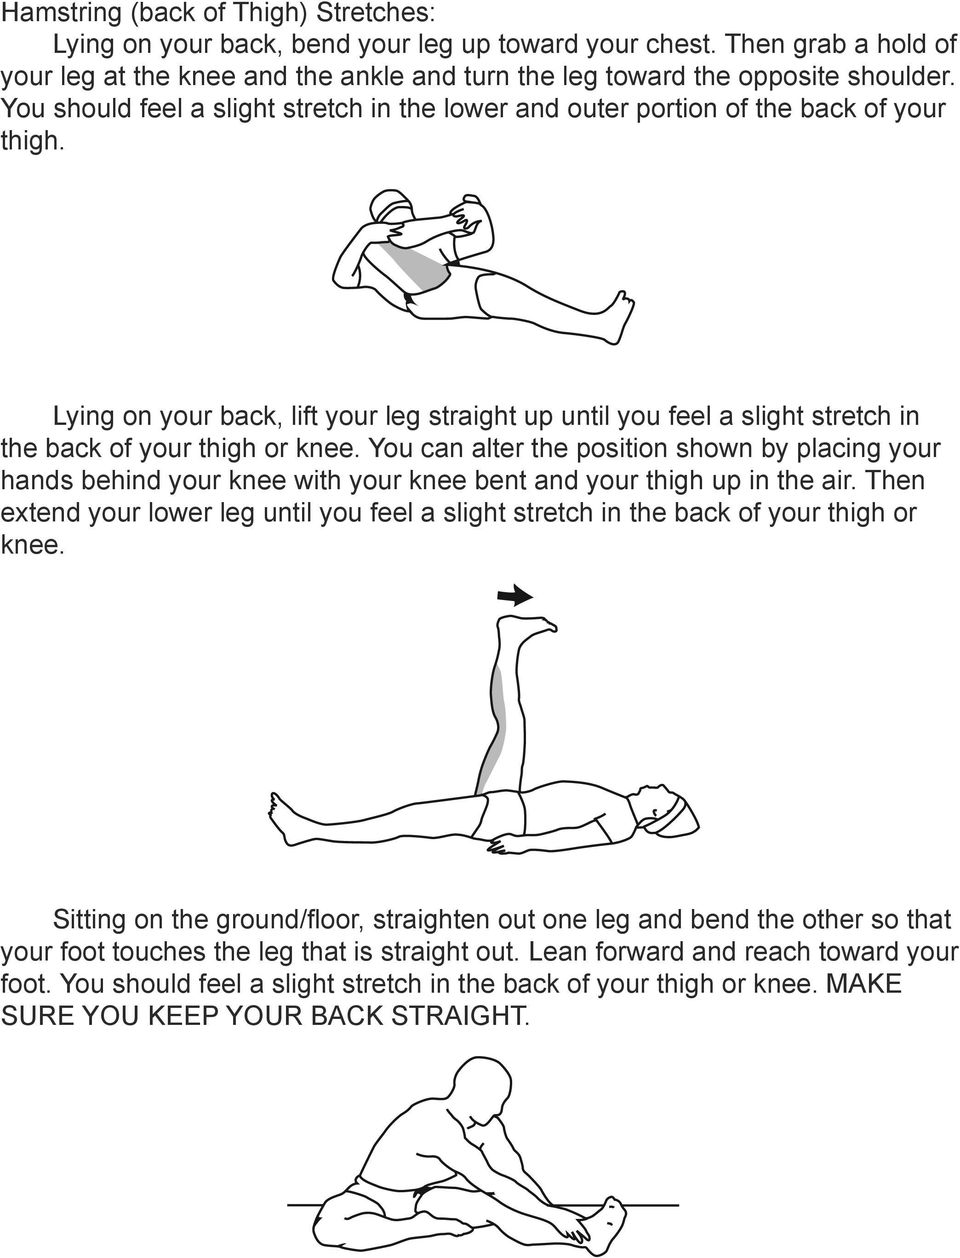 Lying on your back, lift your leg straight up until you feel a slight stretch in the back of your thigh or knee.